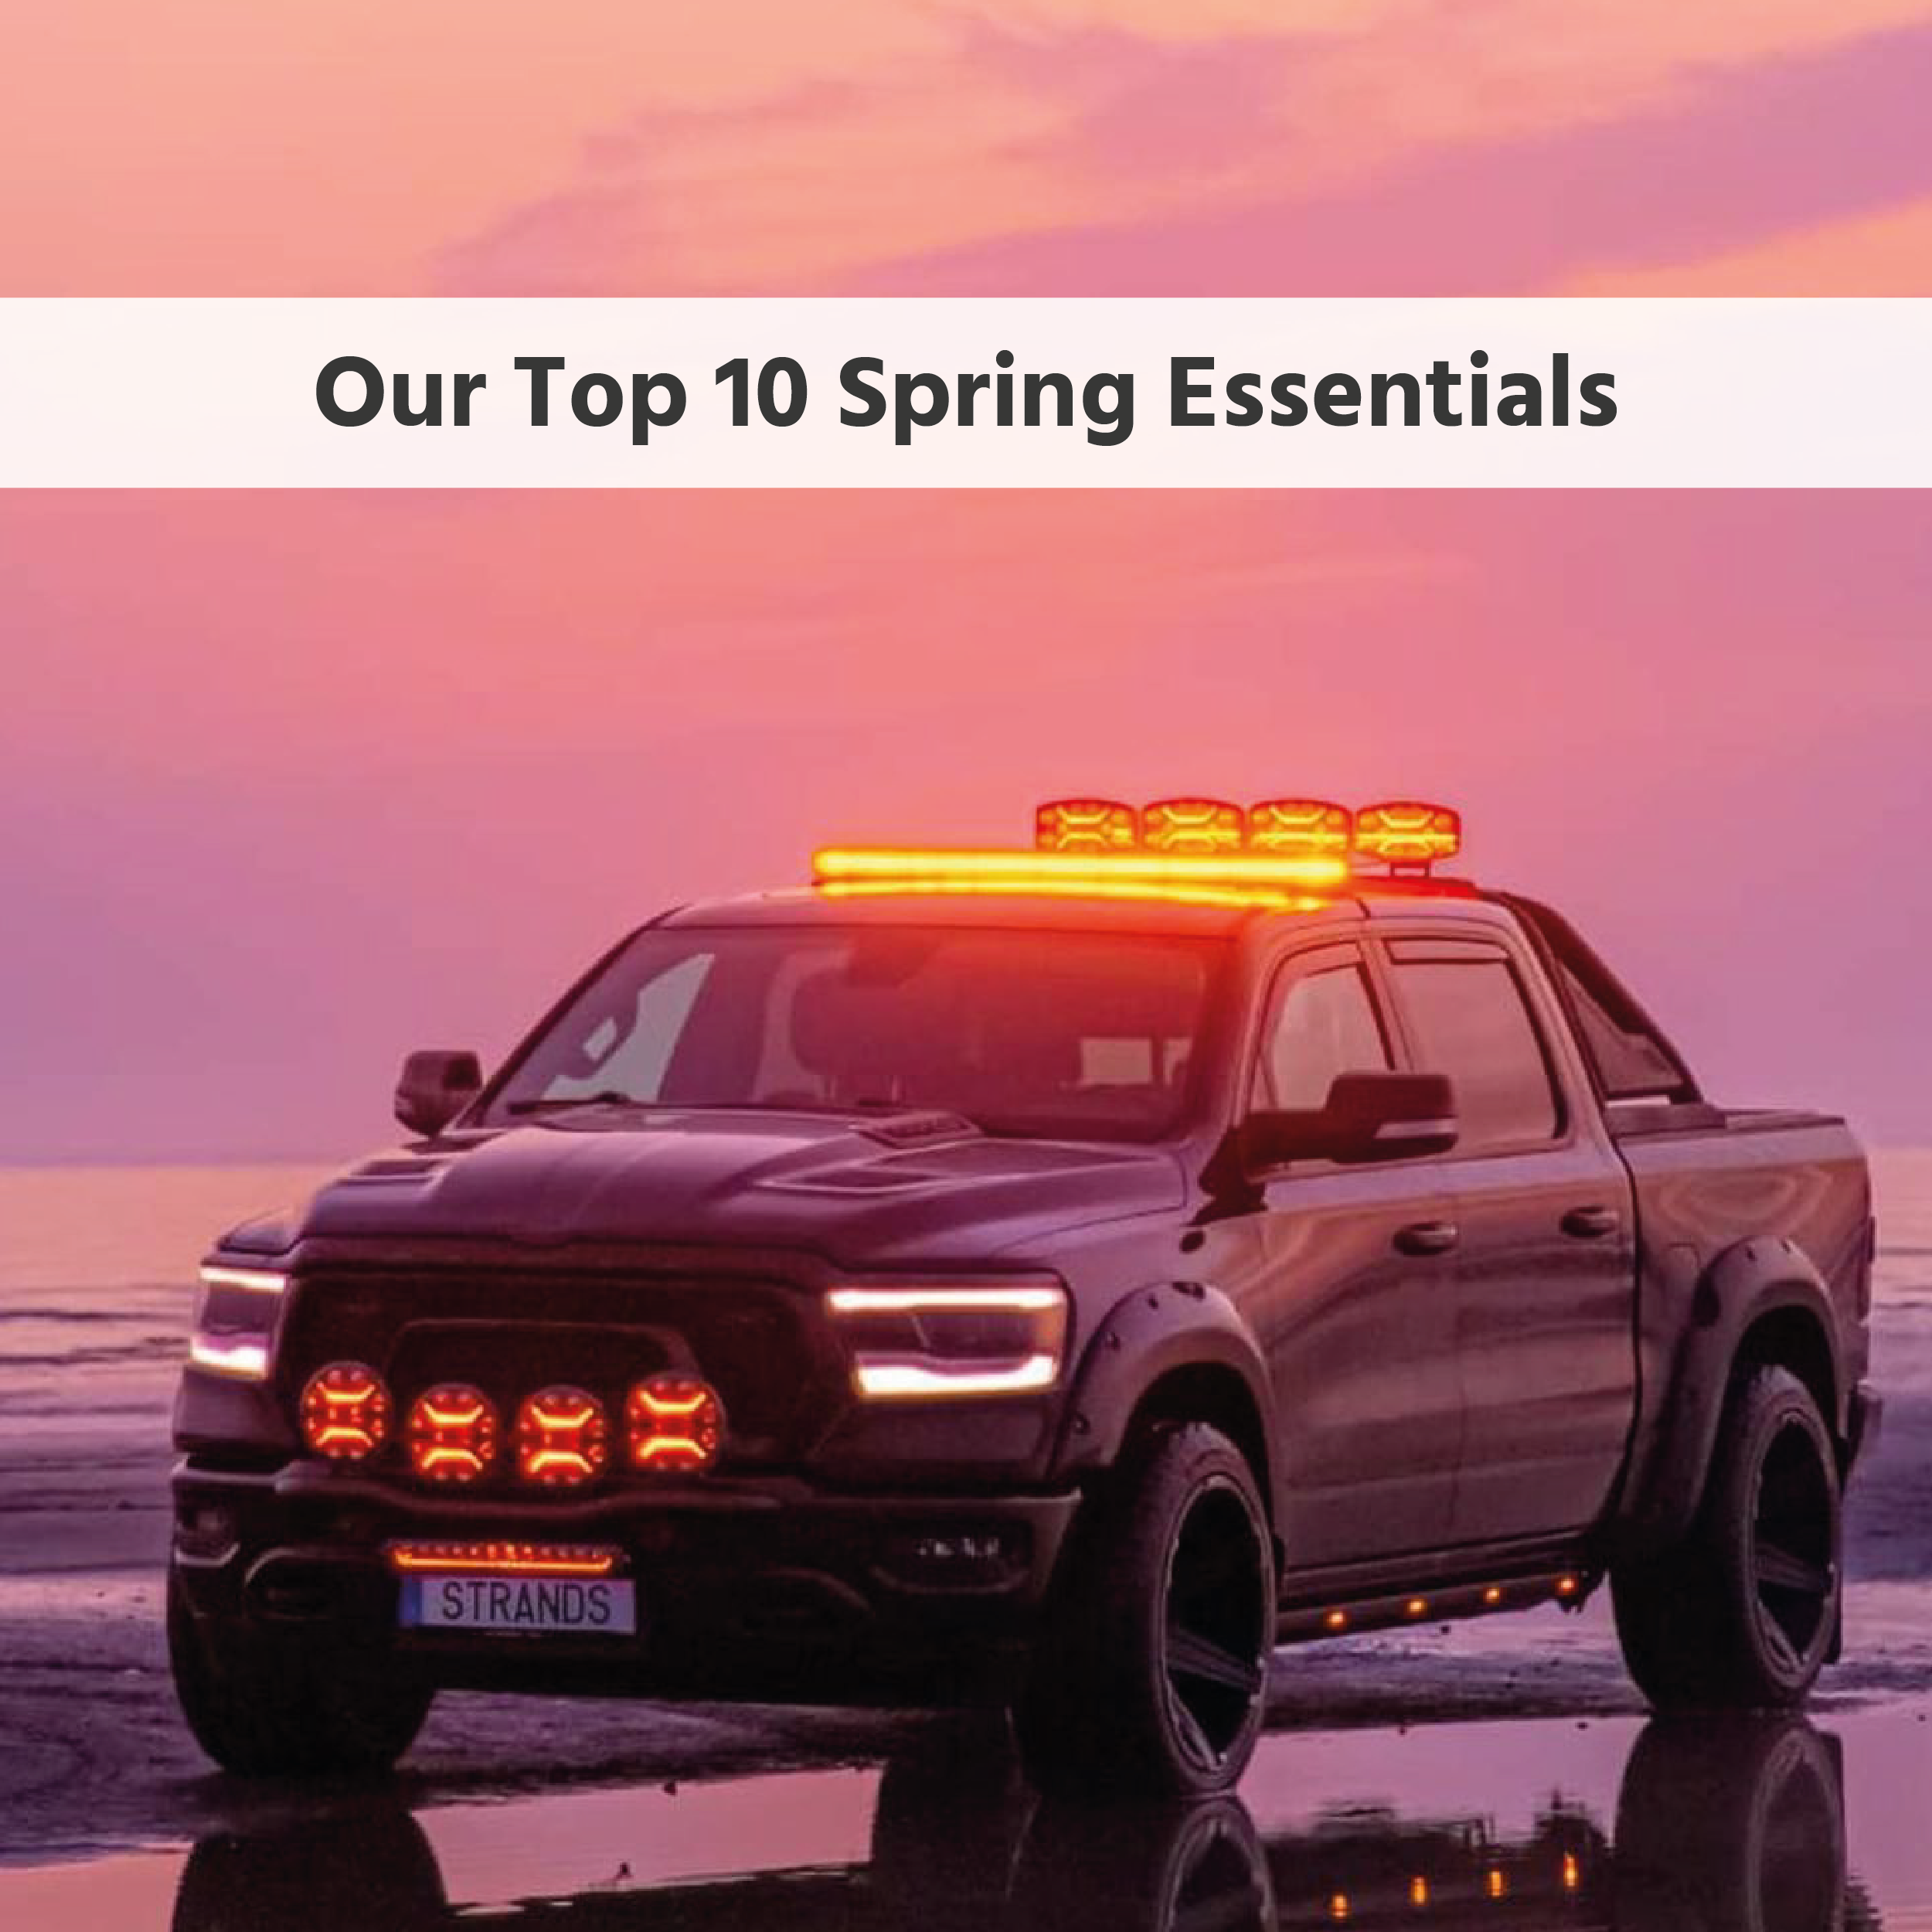 Image of Our Top 10 Spring Essentials